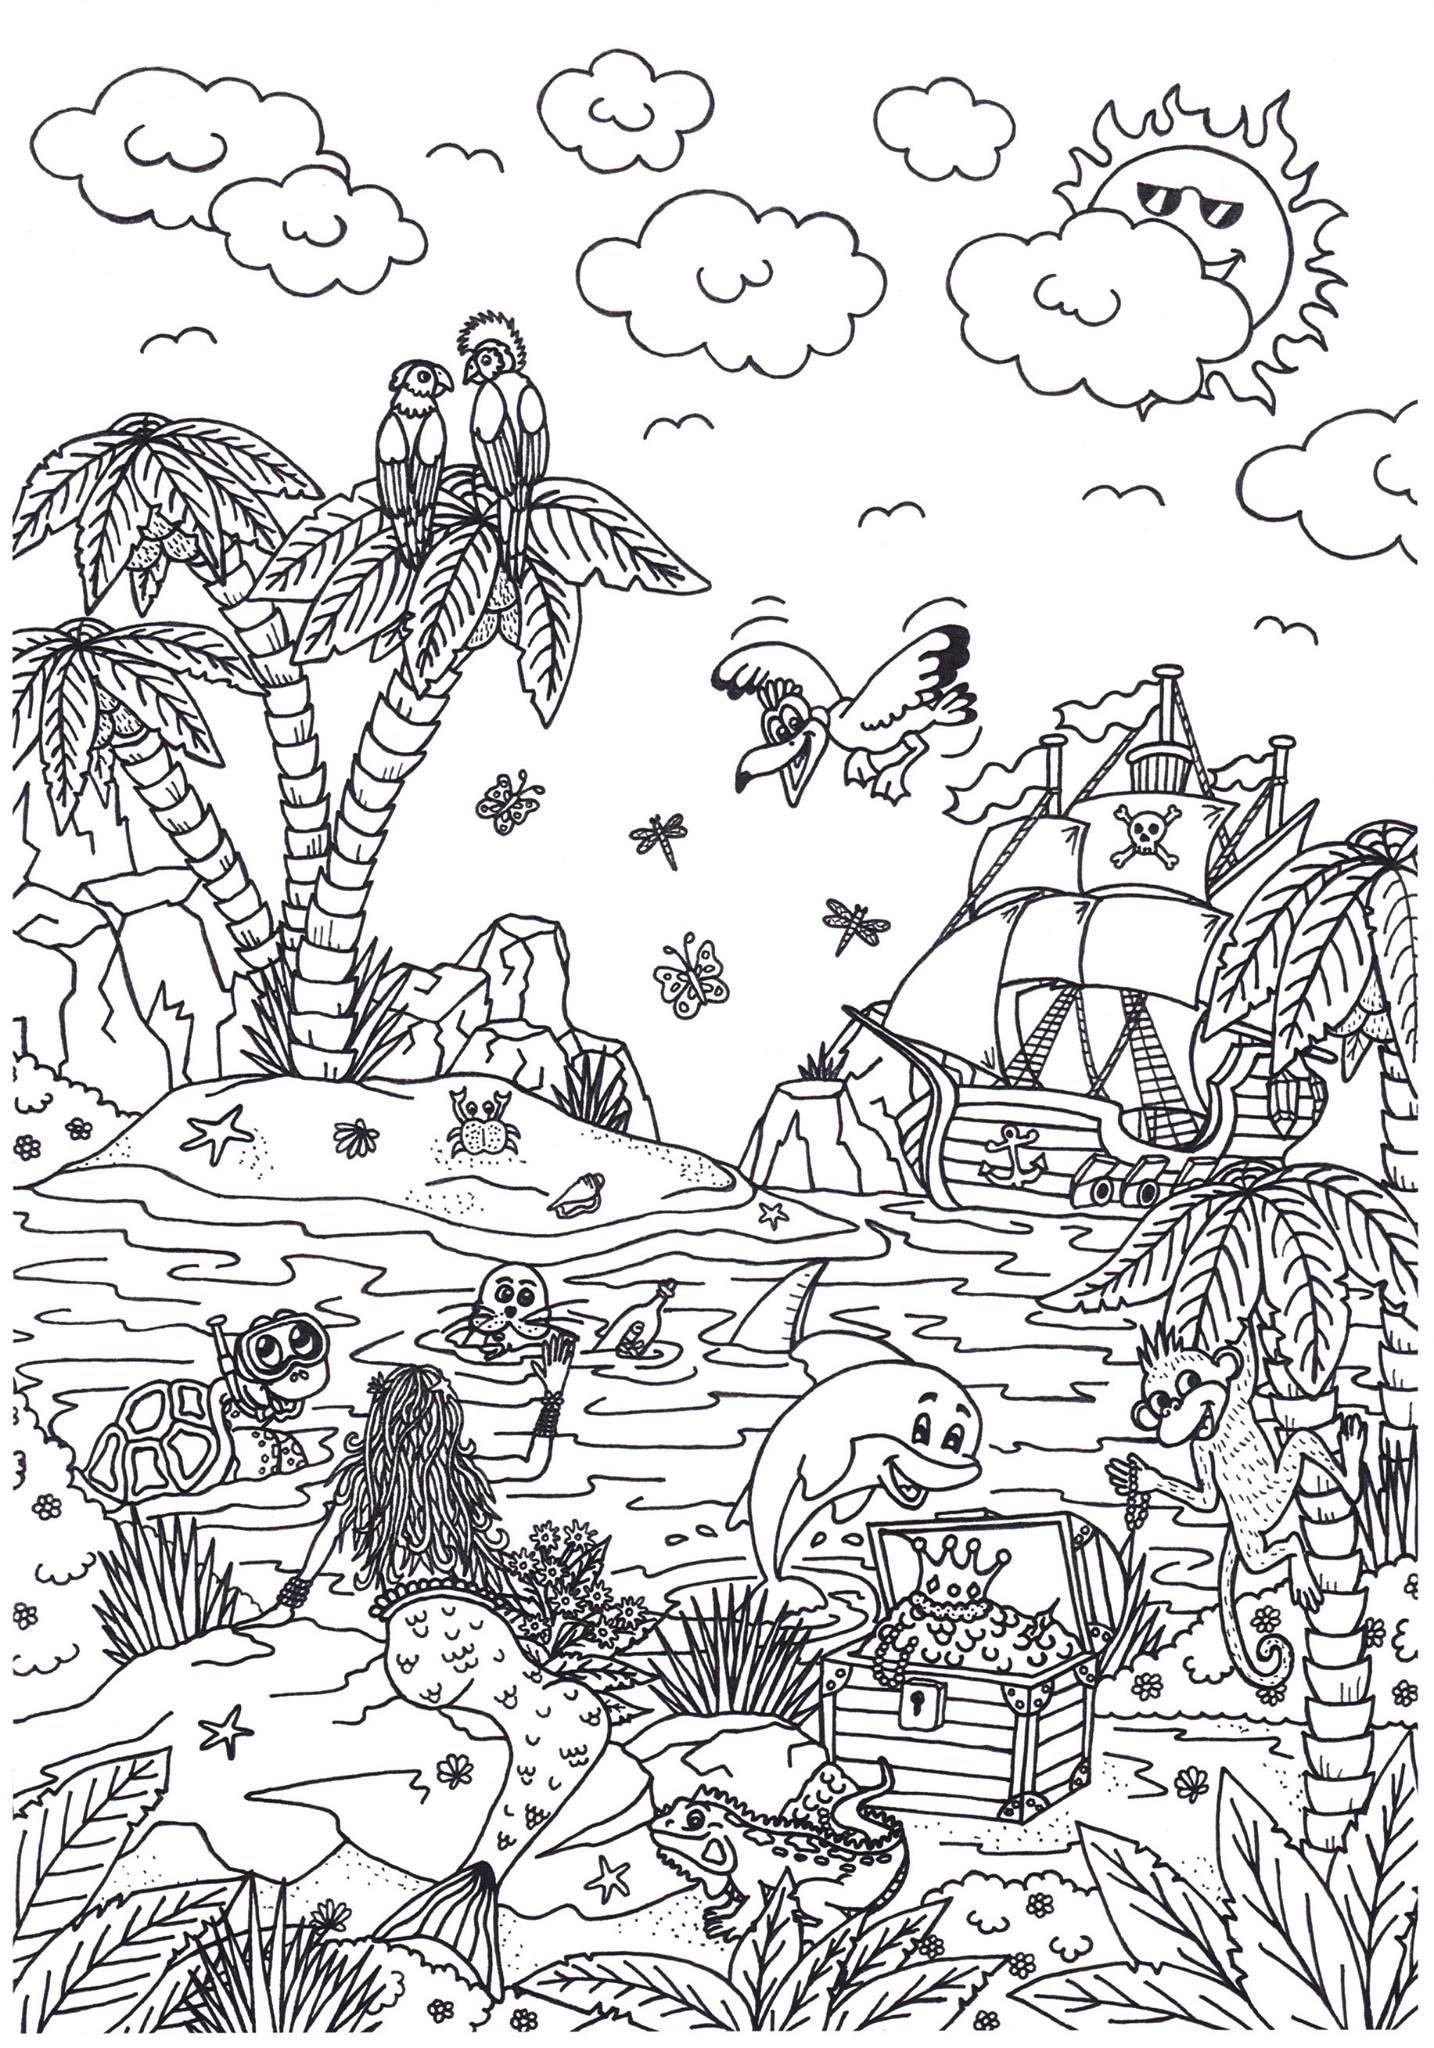 Coloring page fairytale island